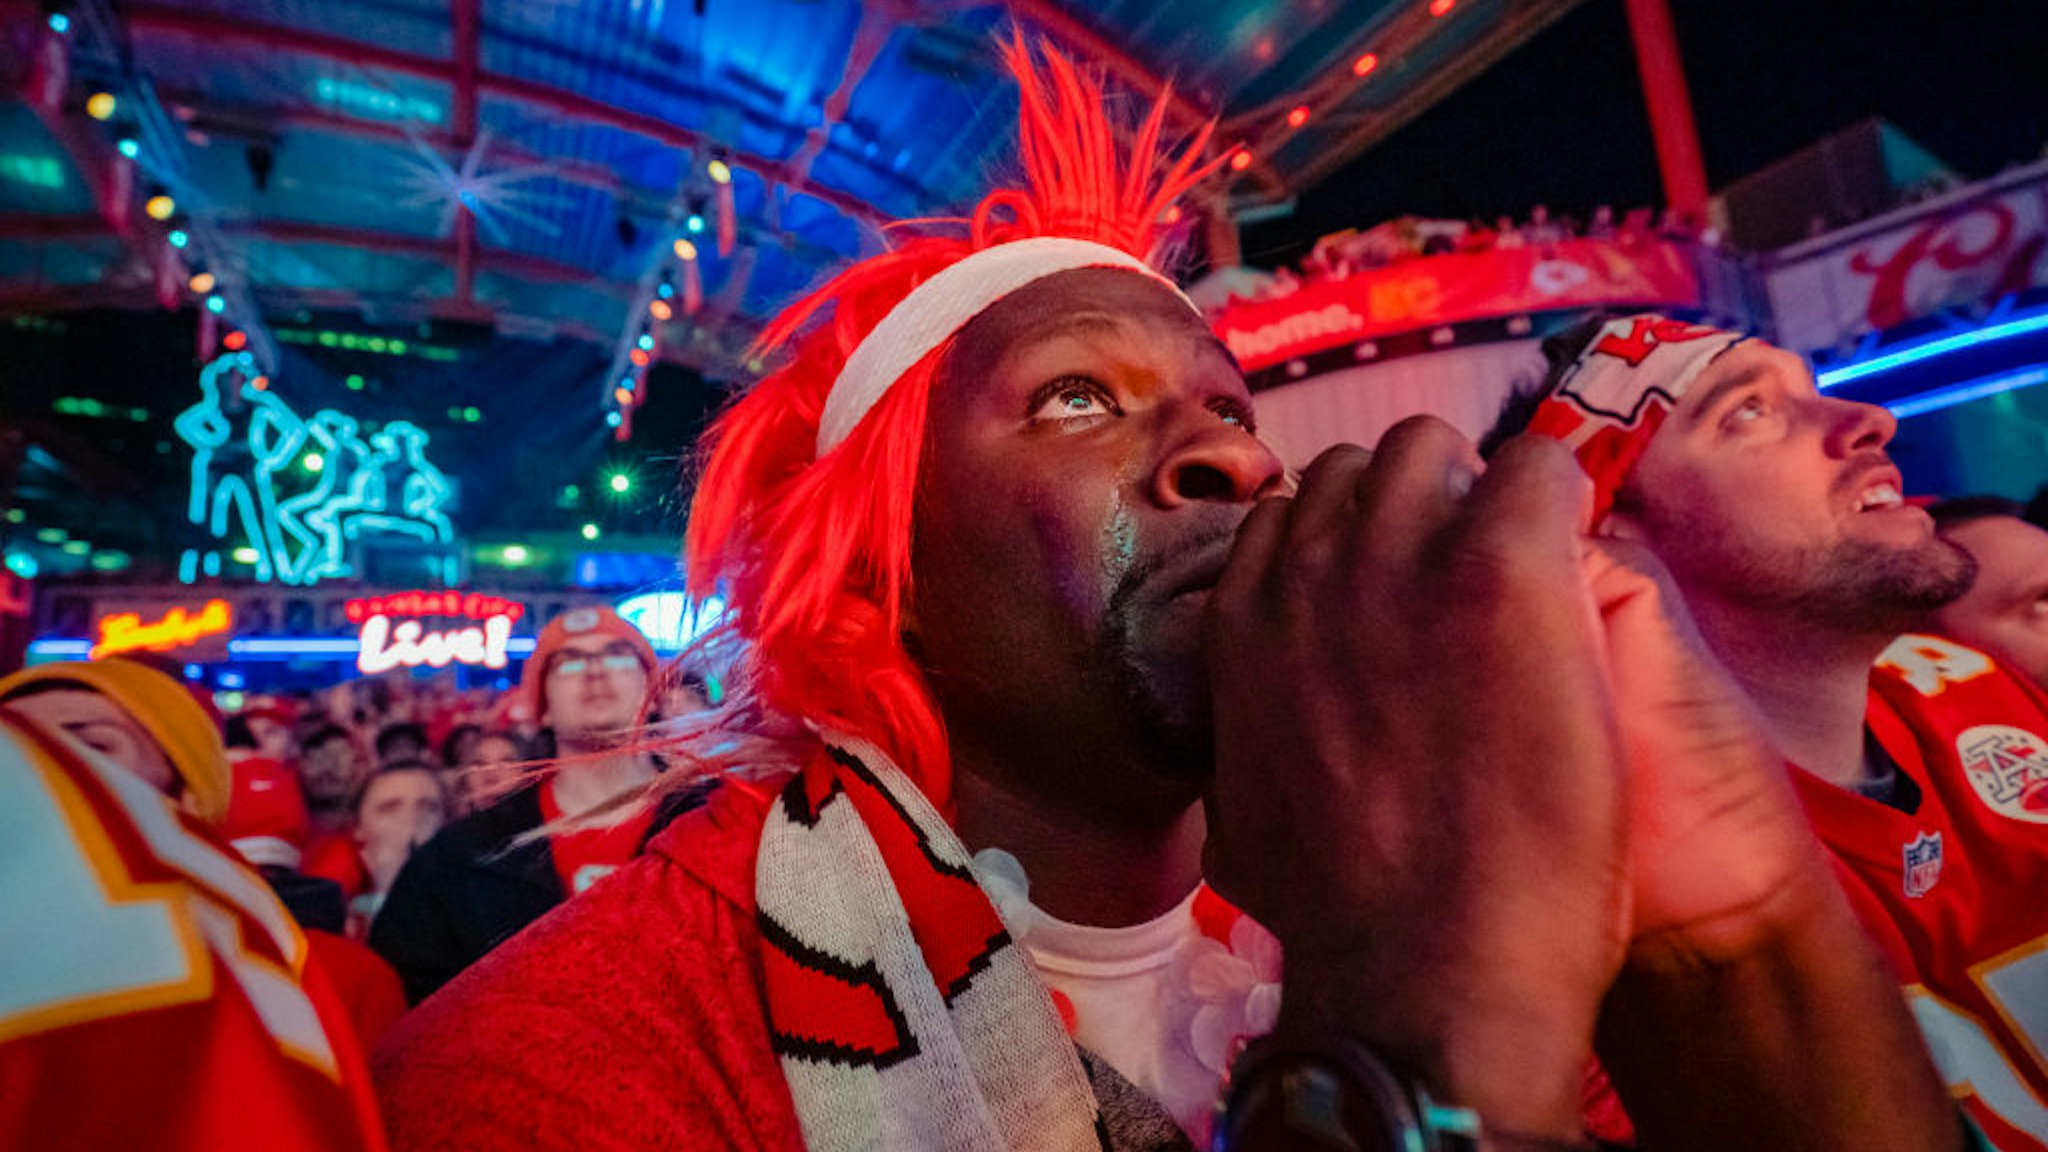 A Chiefs fans cry"u2019s while watching the Chiefs take the lead at the Power and Light District as the Kansas City Chiefs take on the San Francisco 49ers in the Super Bowl on February 2, 2020 in Kansas City, Kansas.